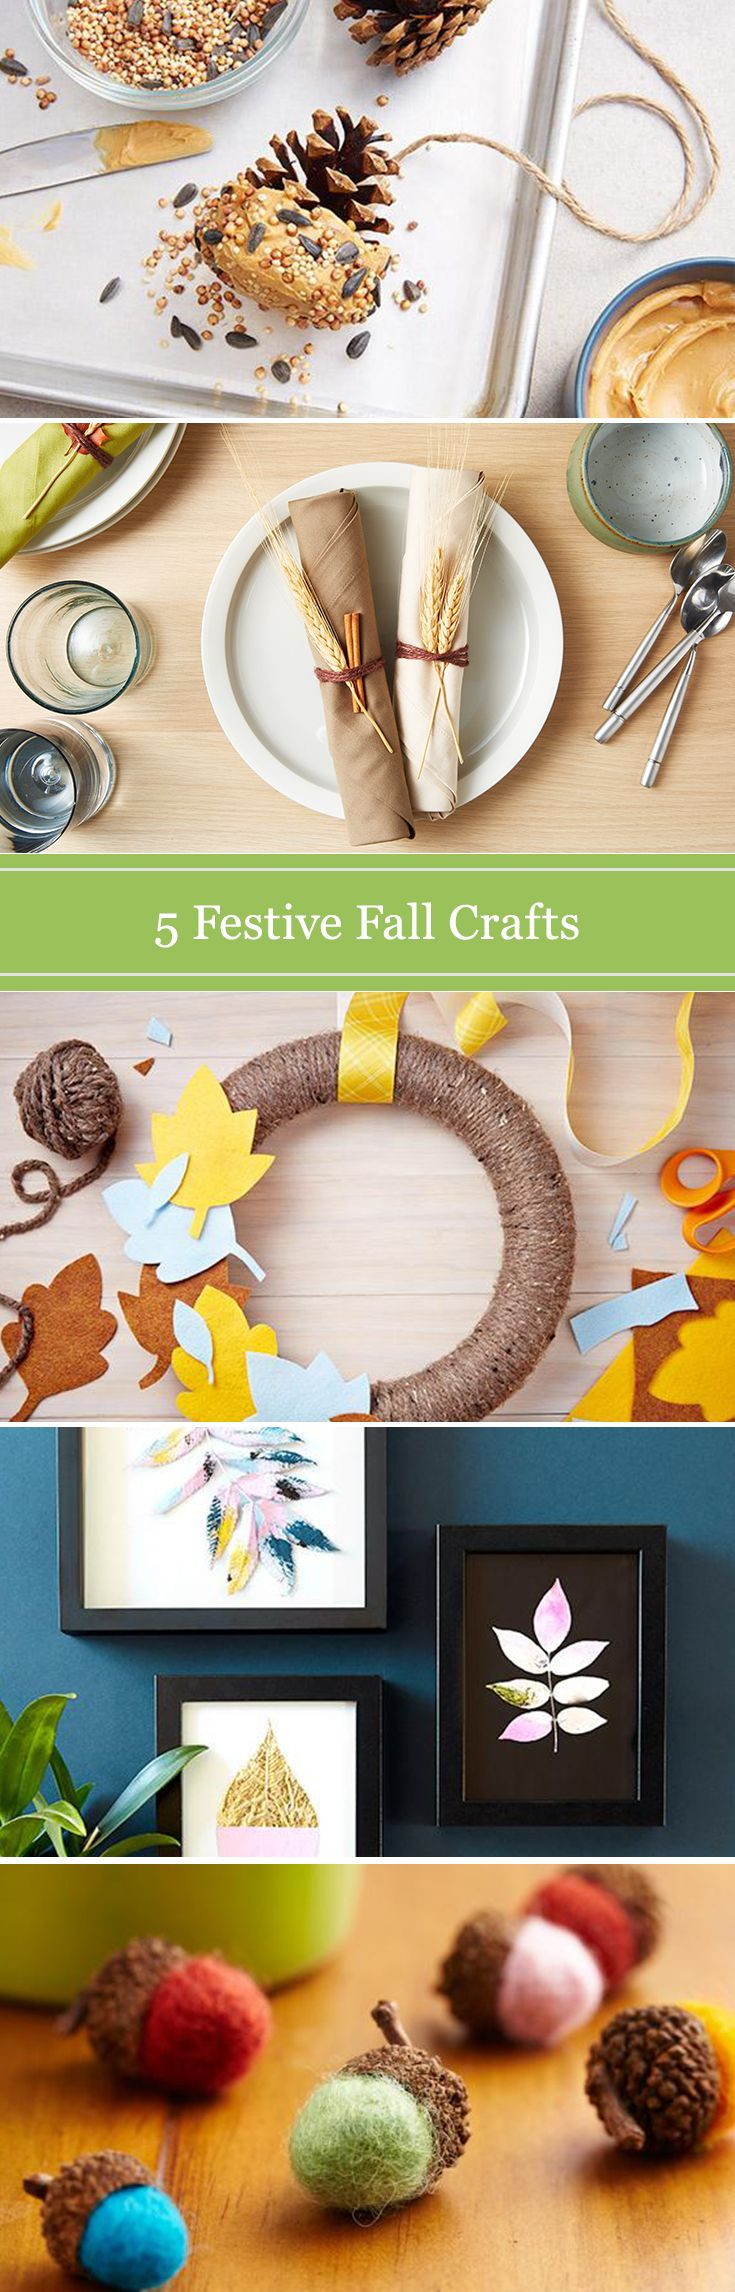 Easy Craft Ideas For Adults
 51 best Craft Ideas for Adults images on Pinterest